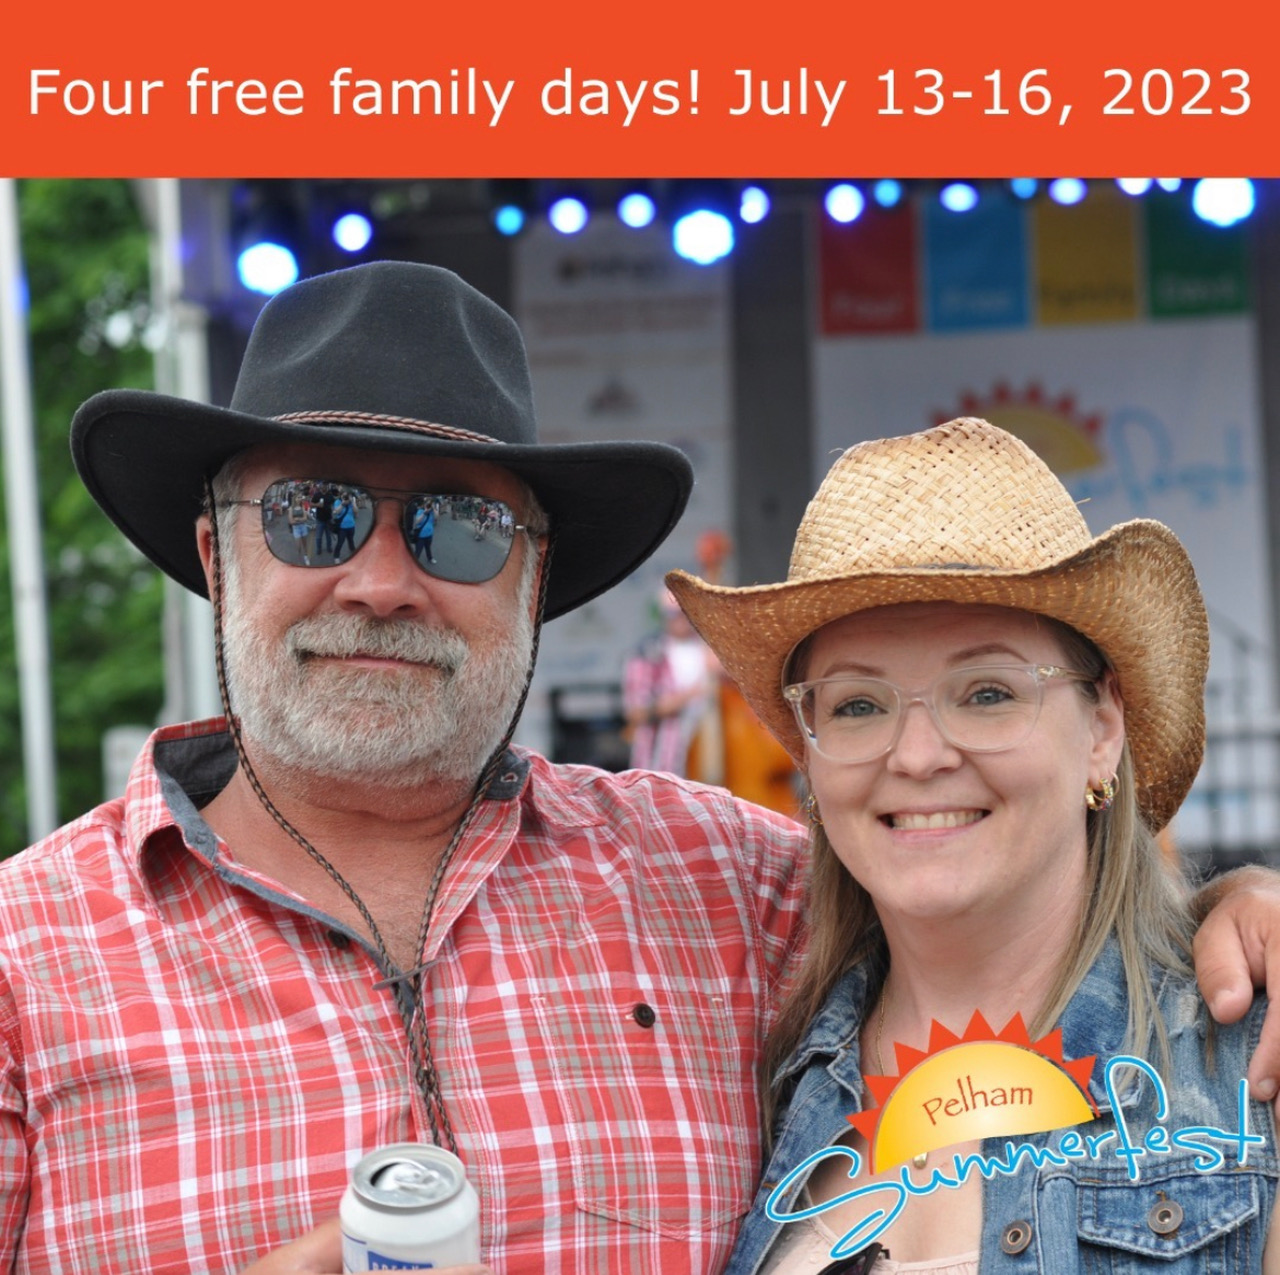 Country Night Friday, July 14, 2023